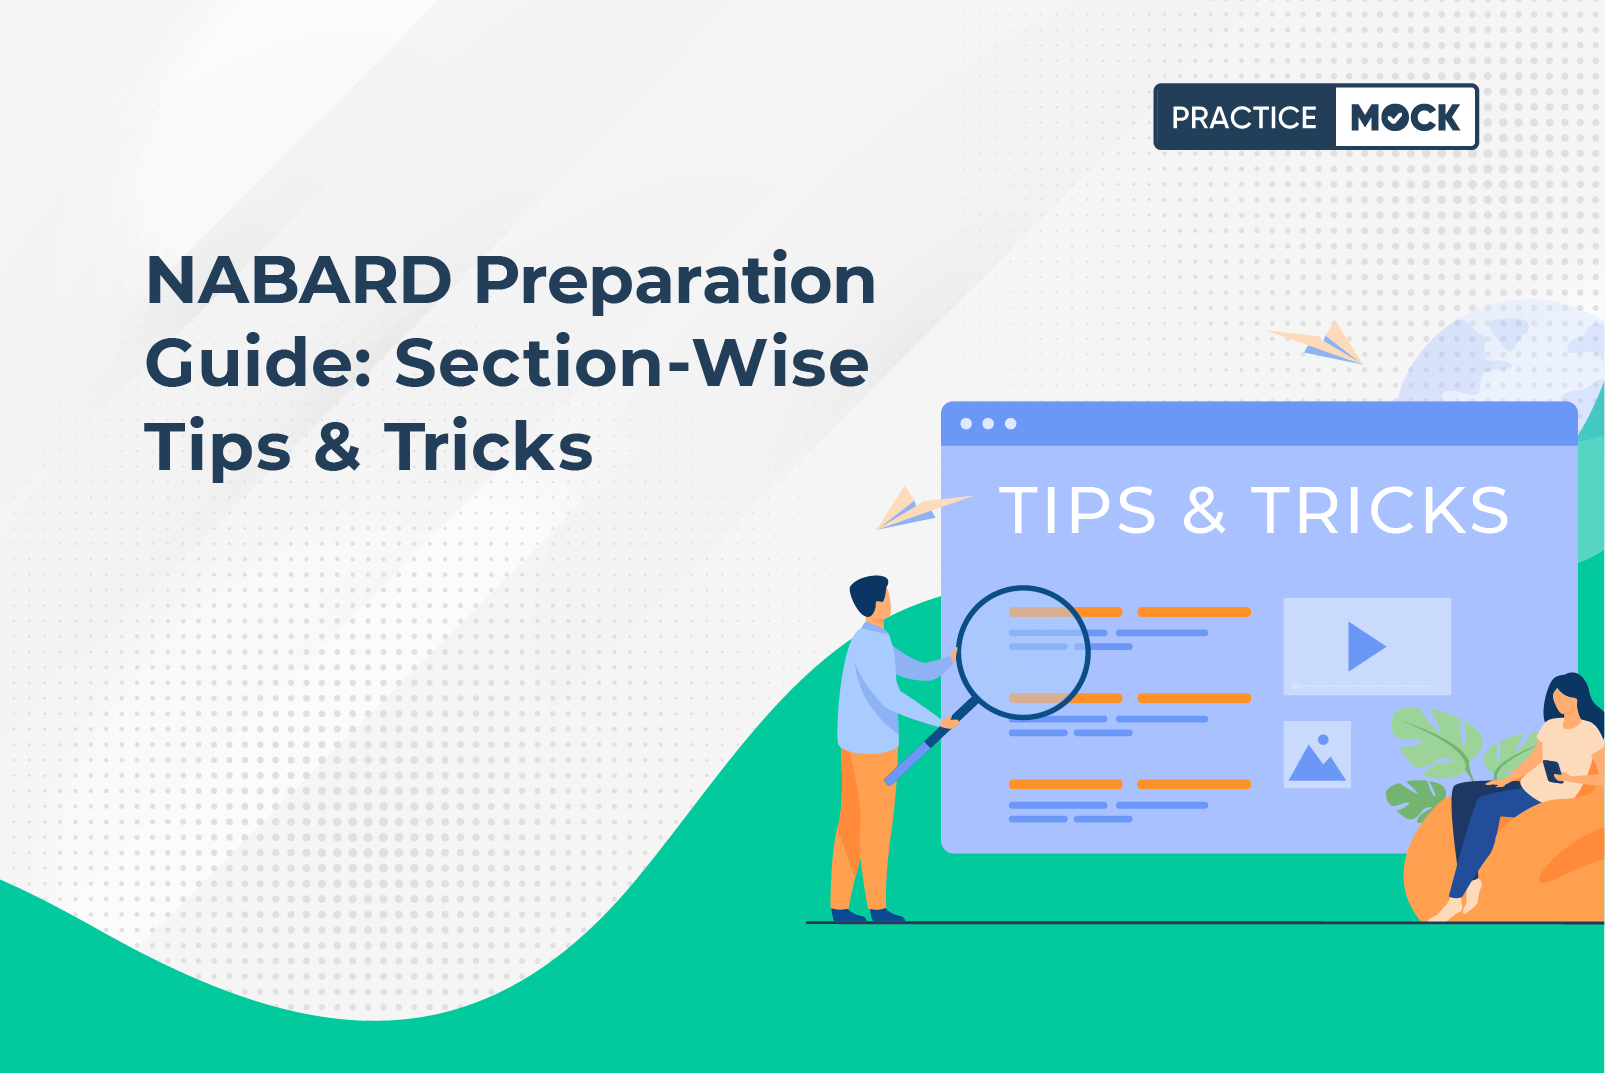 NABARD Preparation Guide Section-Wise Tips & Tricks